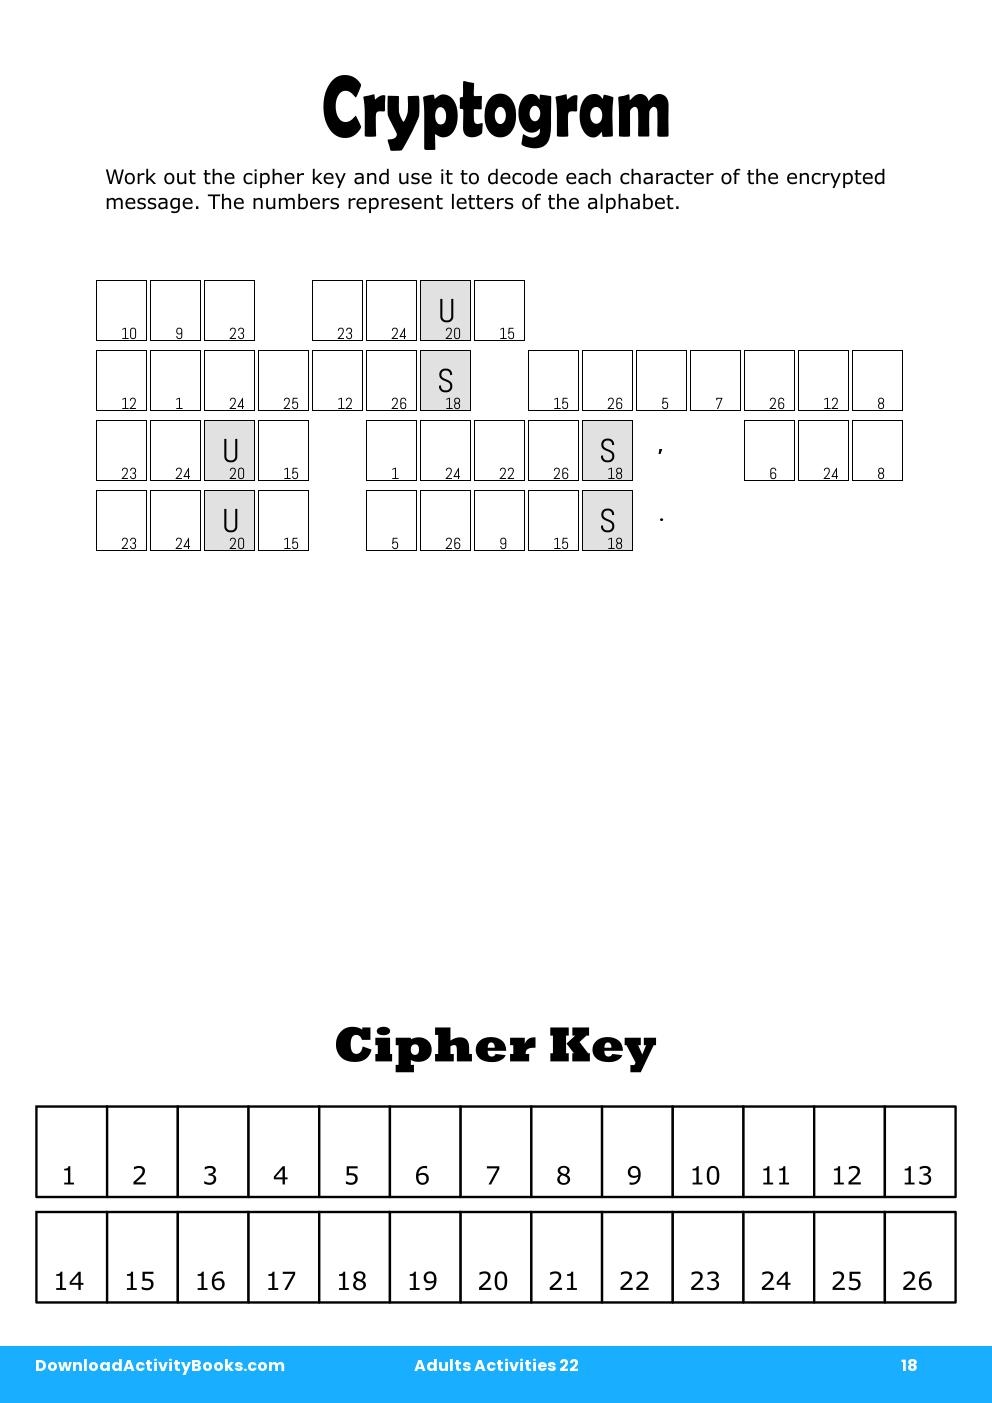 Cryptogram in Adults Activities 22